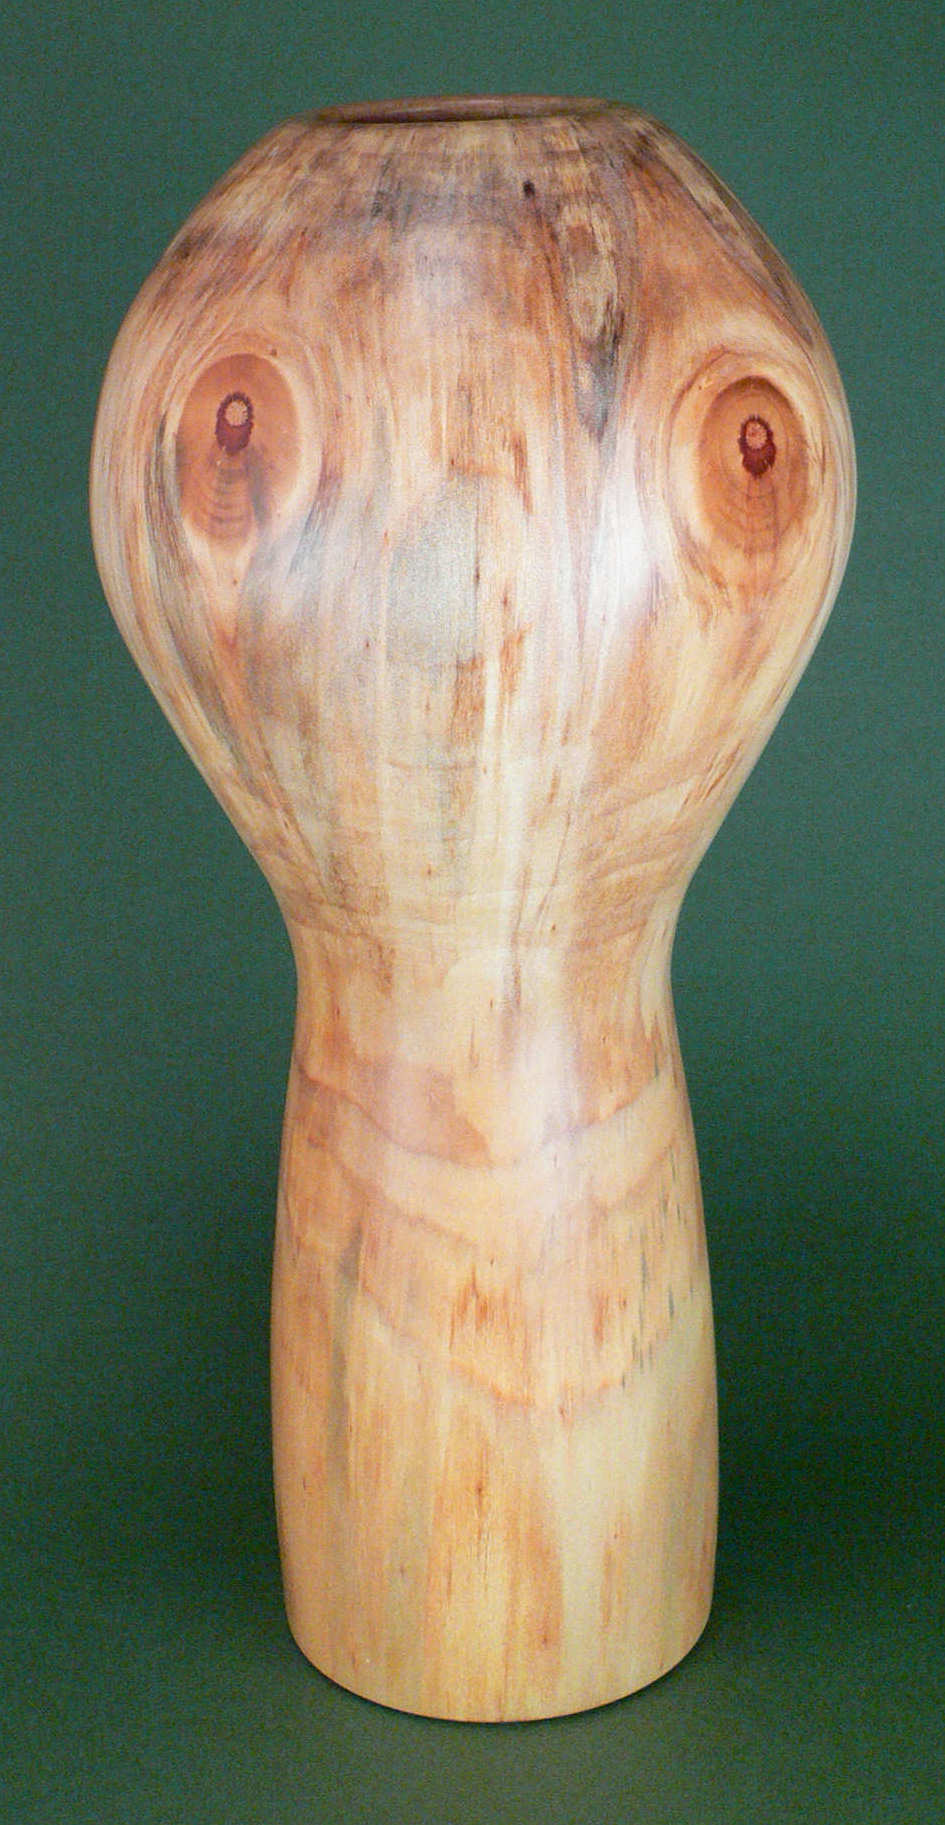 Image showing an example of a monkey puzzle hollow form vessel